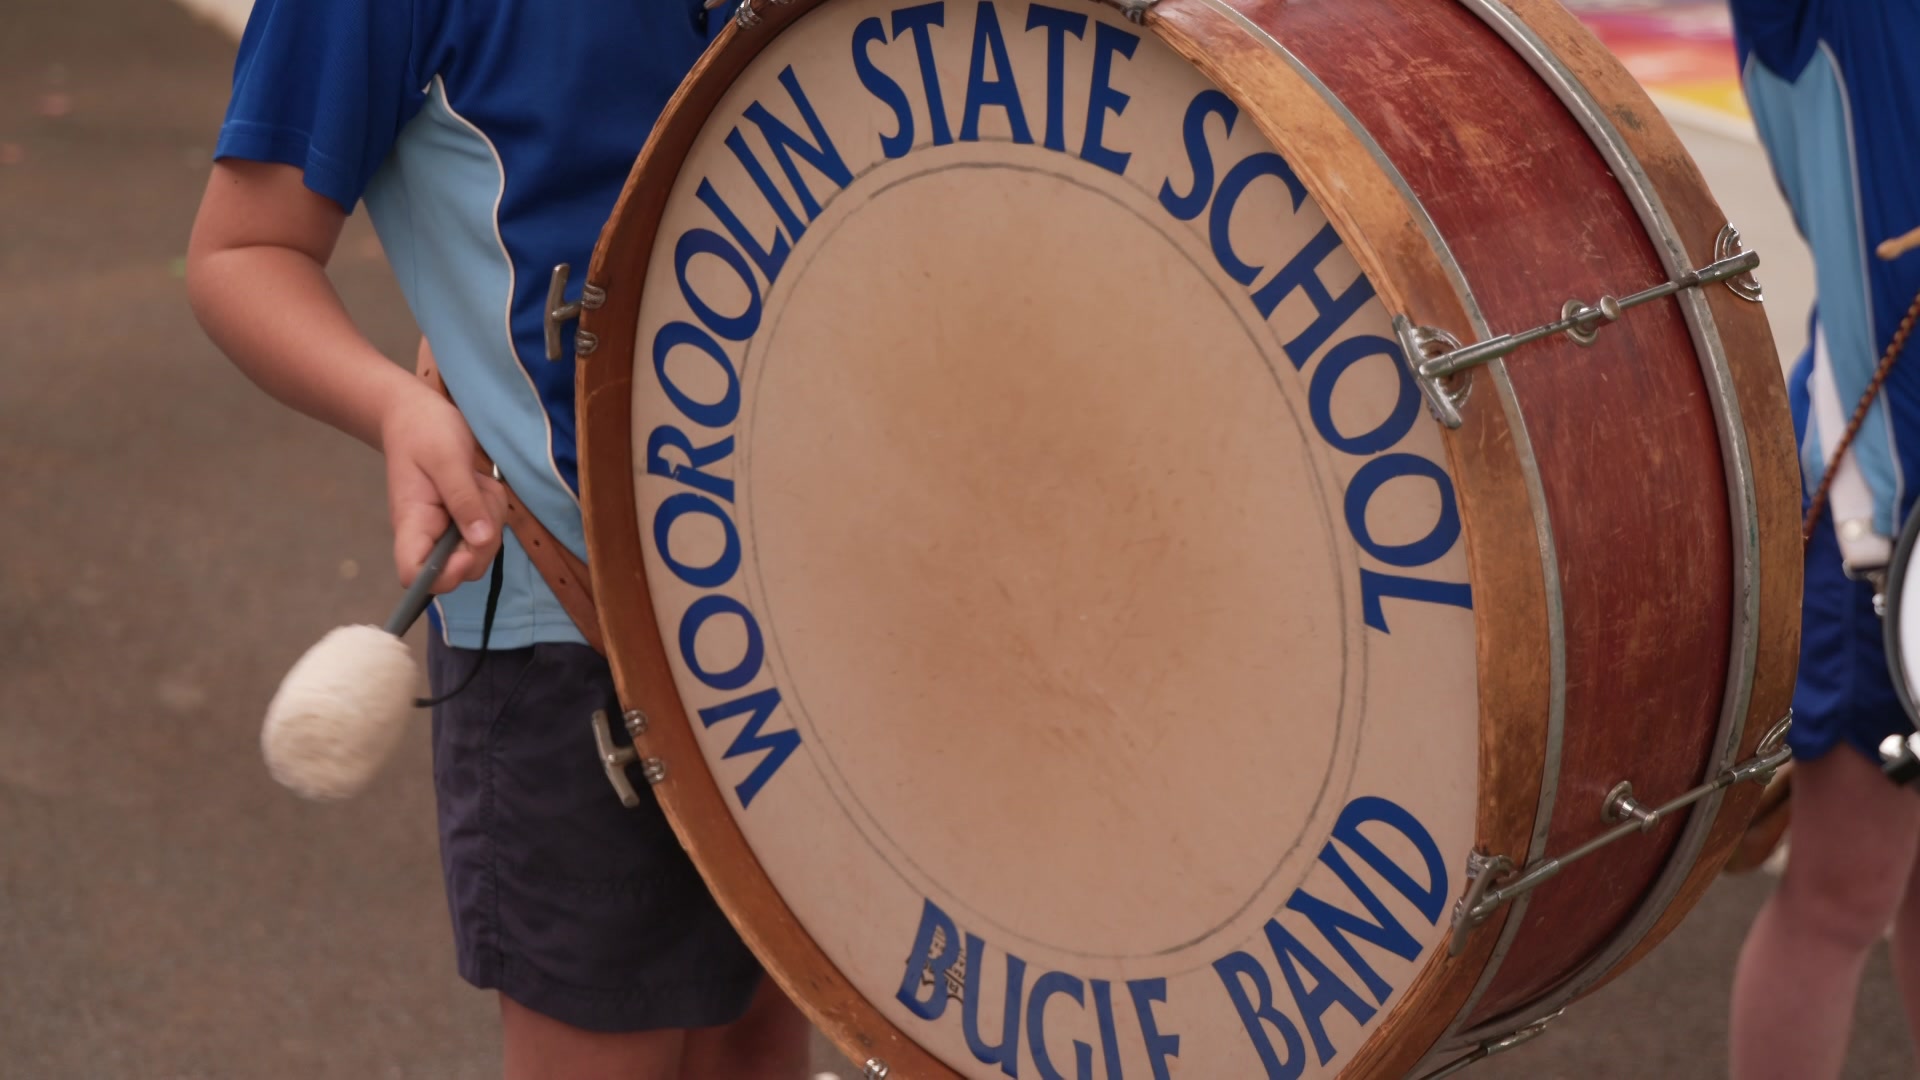 Bass drum with 'Wooroolin State School Bugle Band' written around the perimiter. A child is playing it.